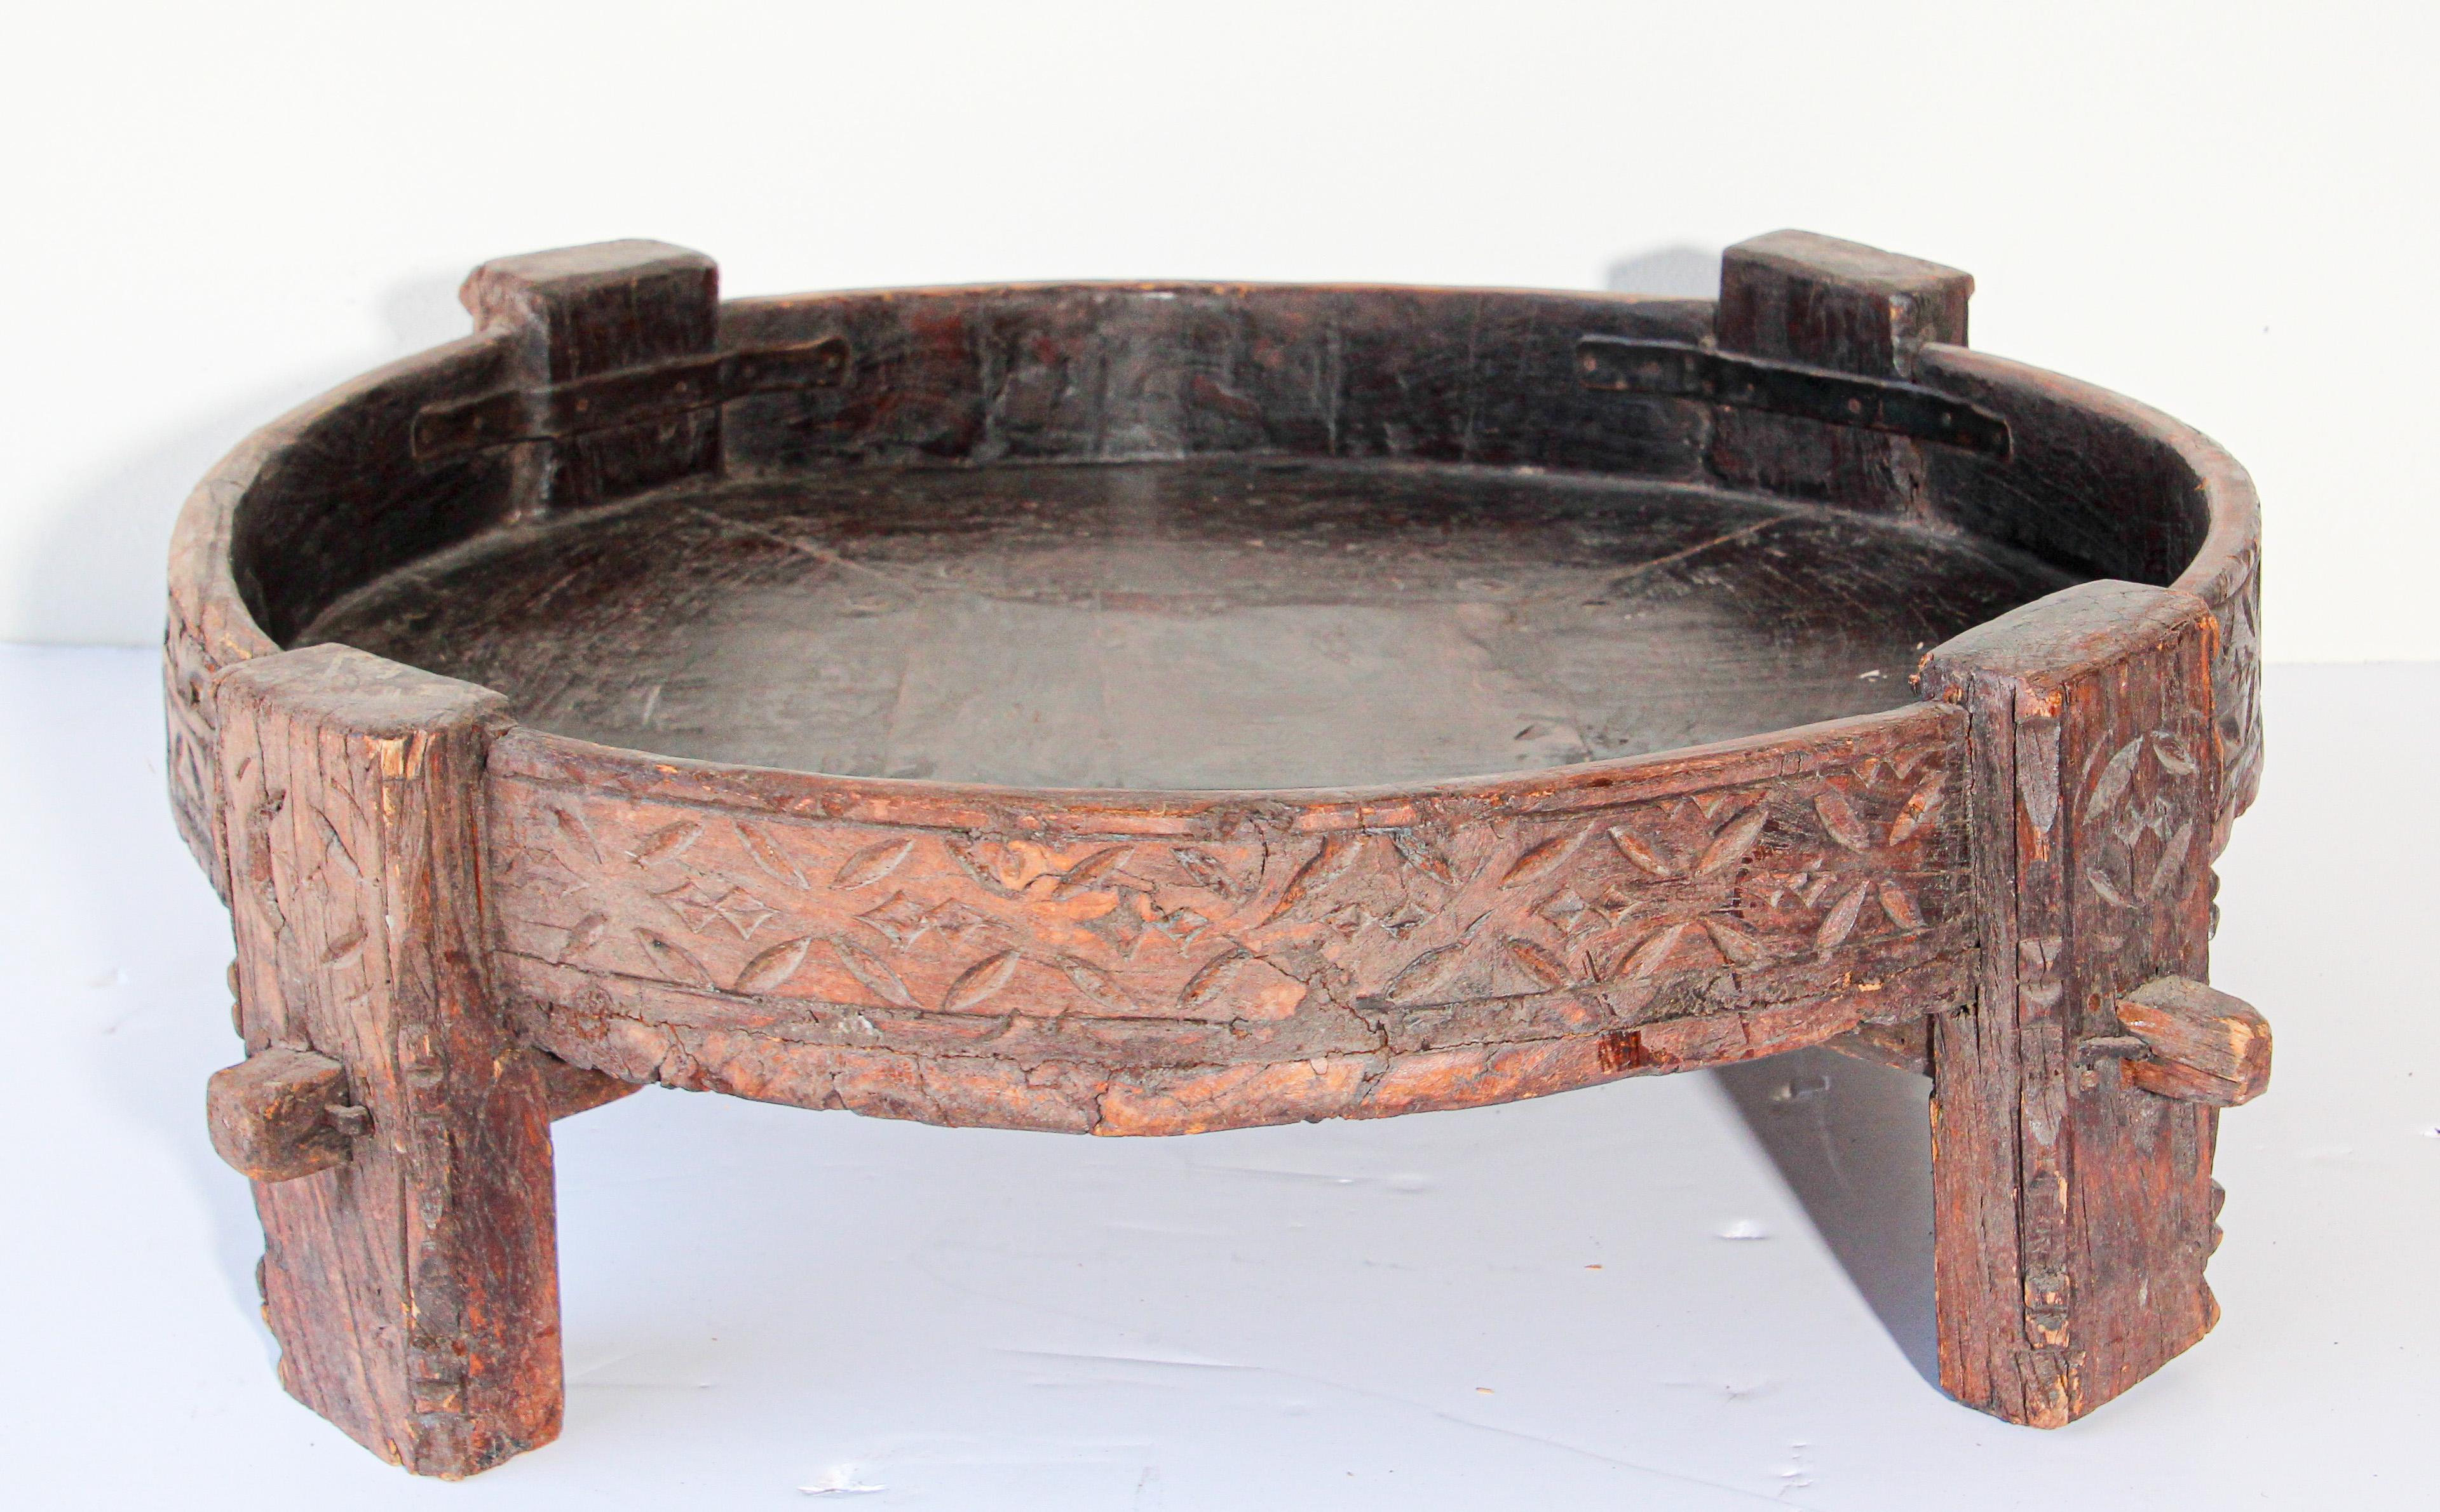 Large antique round hand carved wood Indian grinder tribal table.
Walnut color hand carved with geometric tribal design.
Handcrafted of wood and iron, hand carved with geometric Ethnic tribal design.
Very sturdy rustic wood table with nice